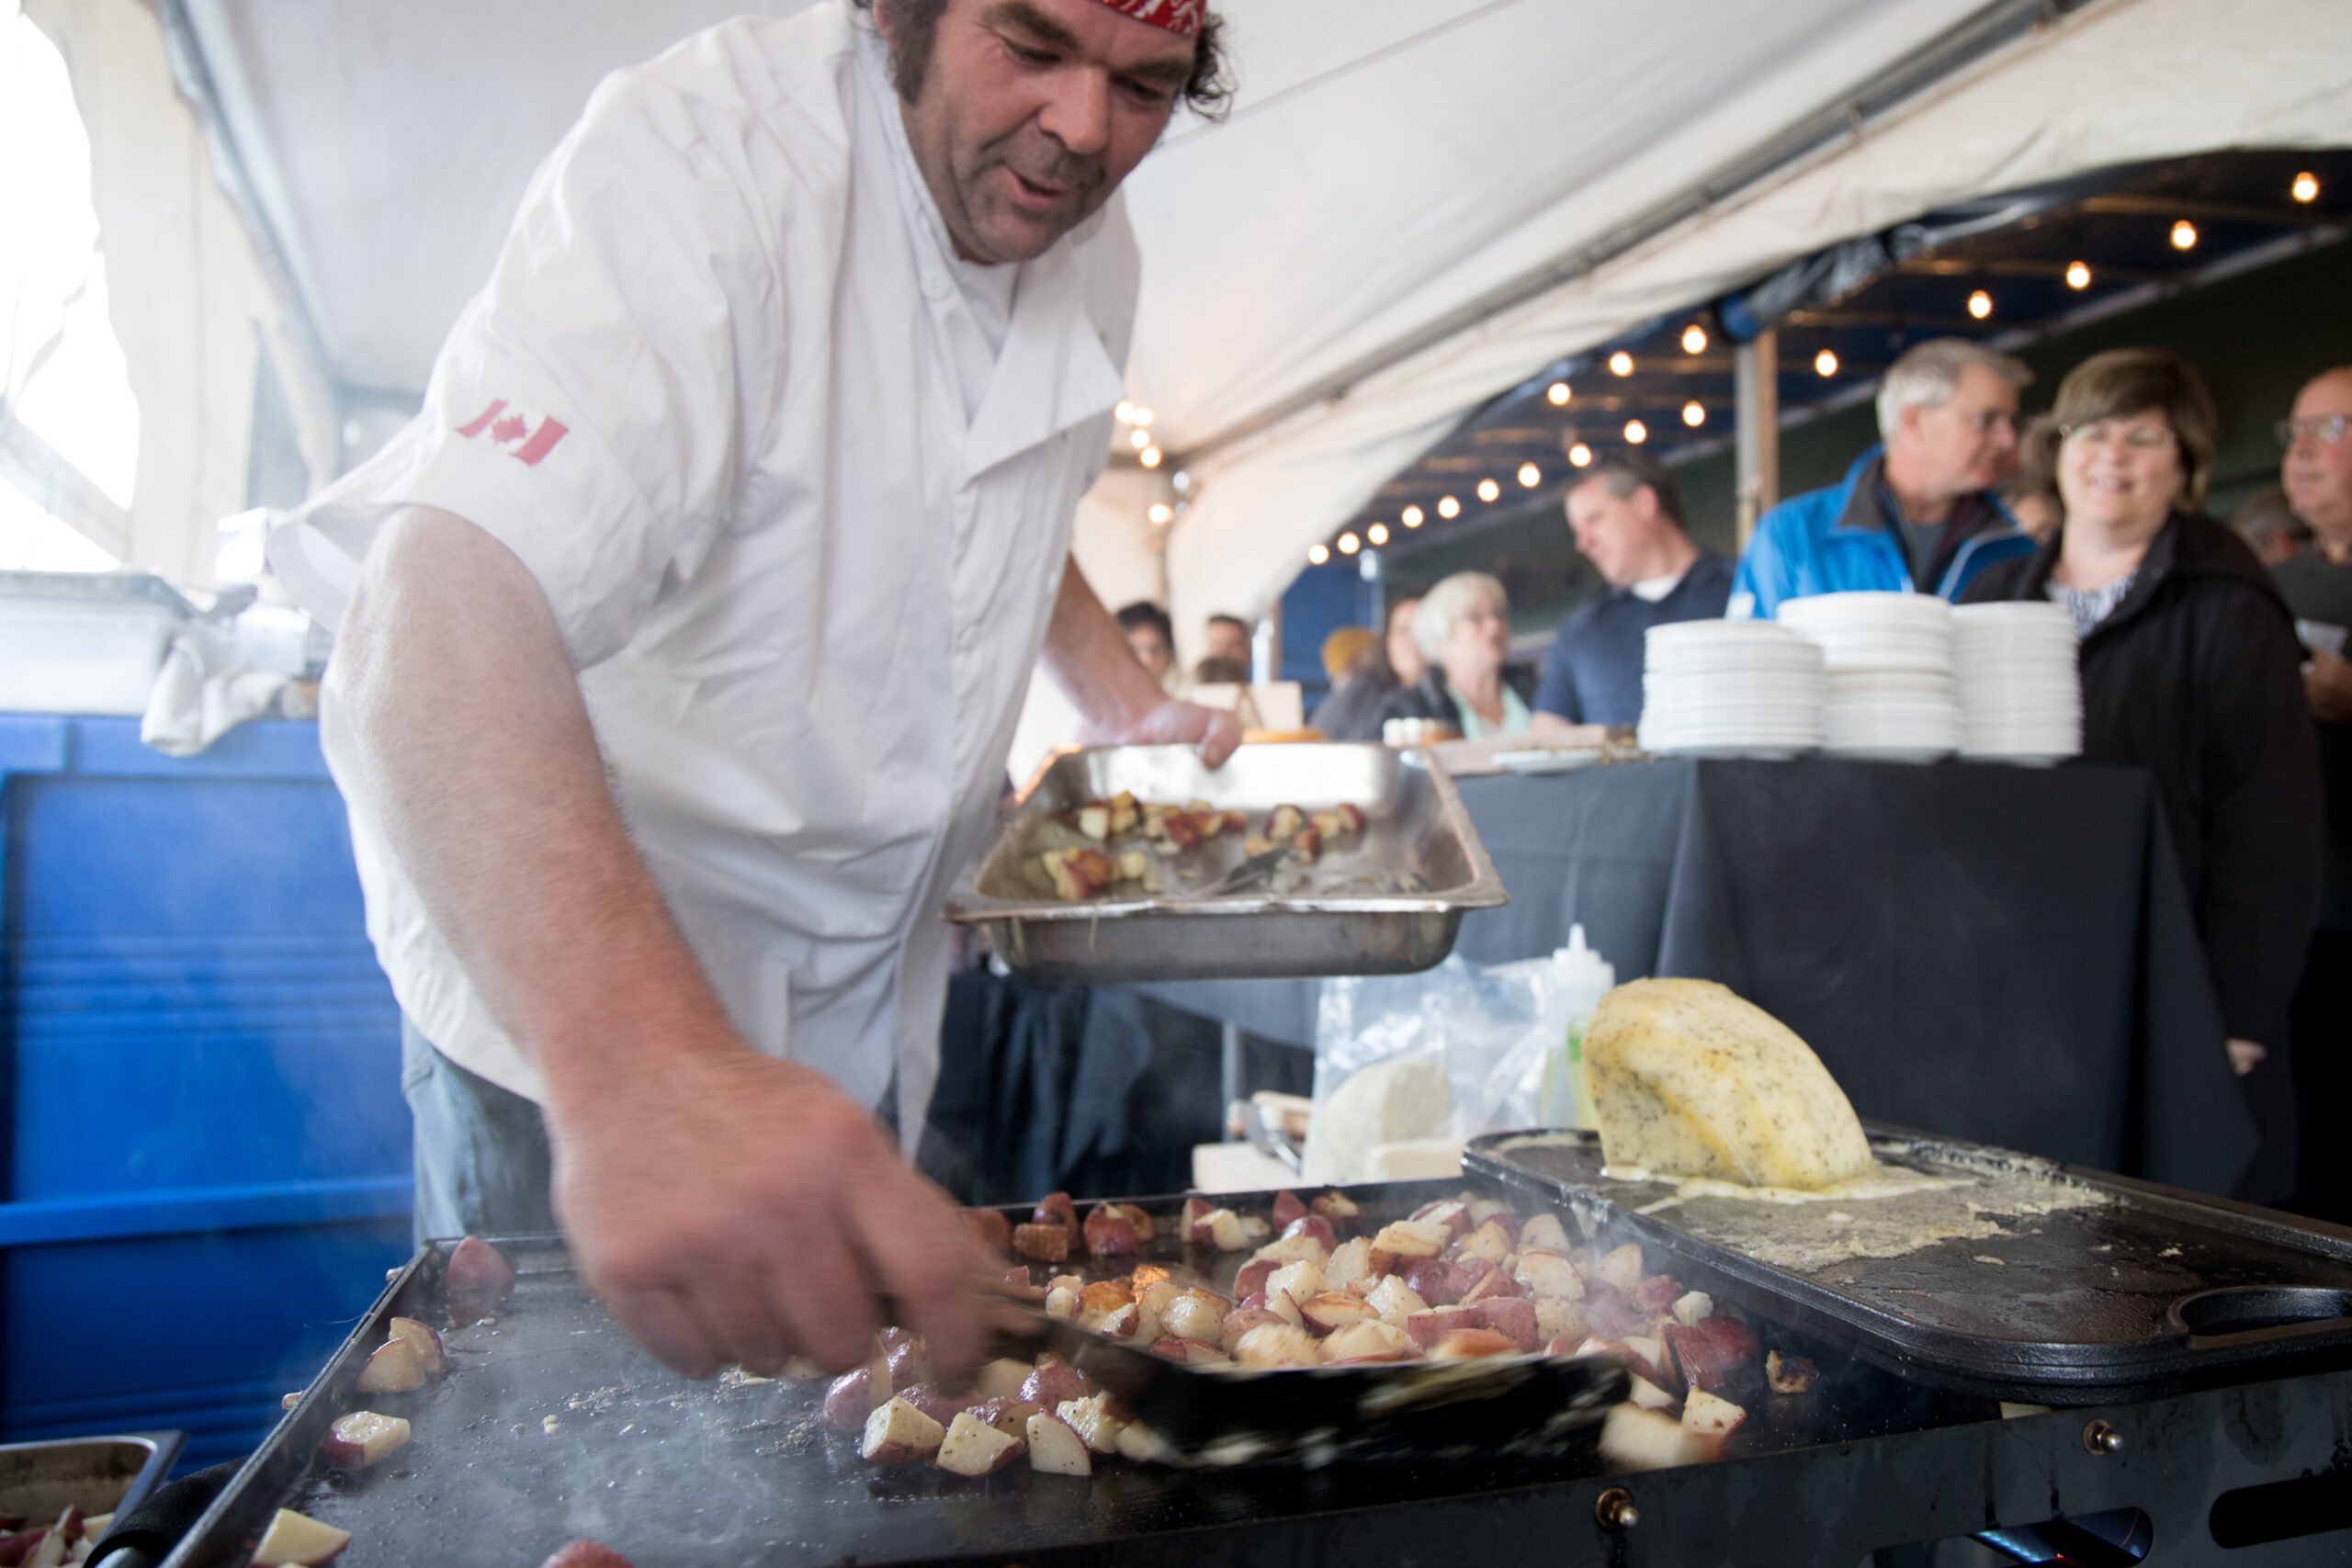 a photo of a chef frying potatoes at an outdoor event